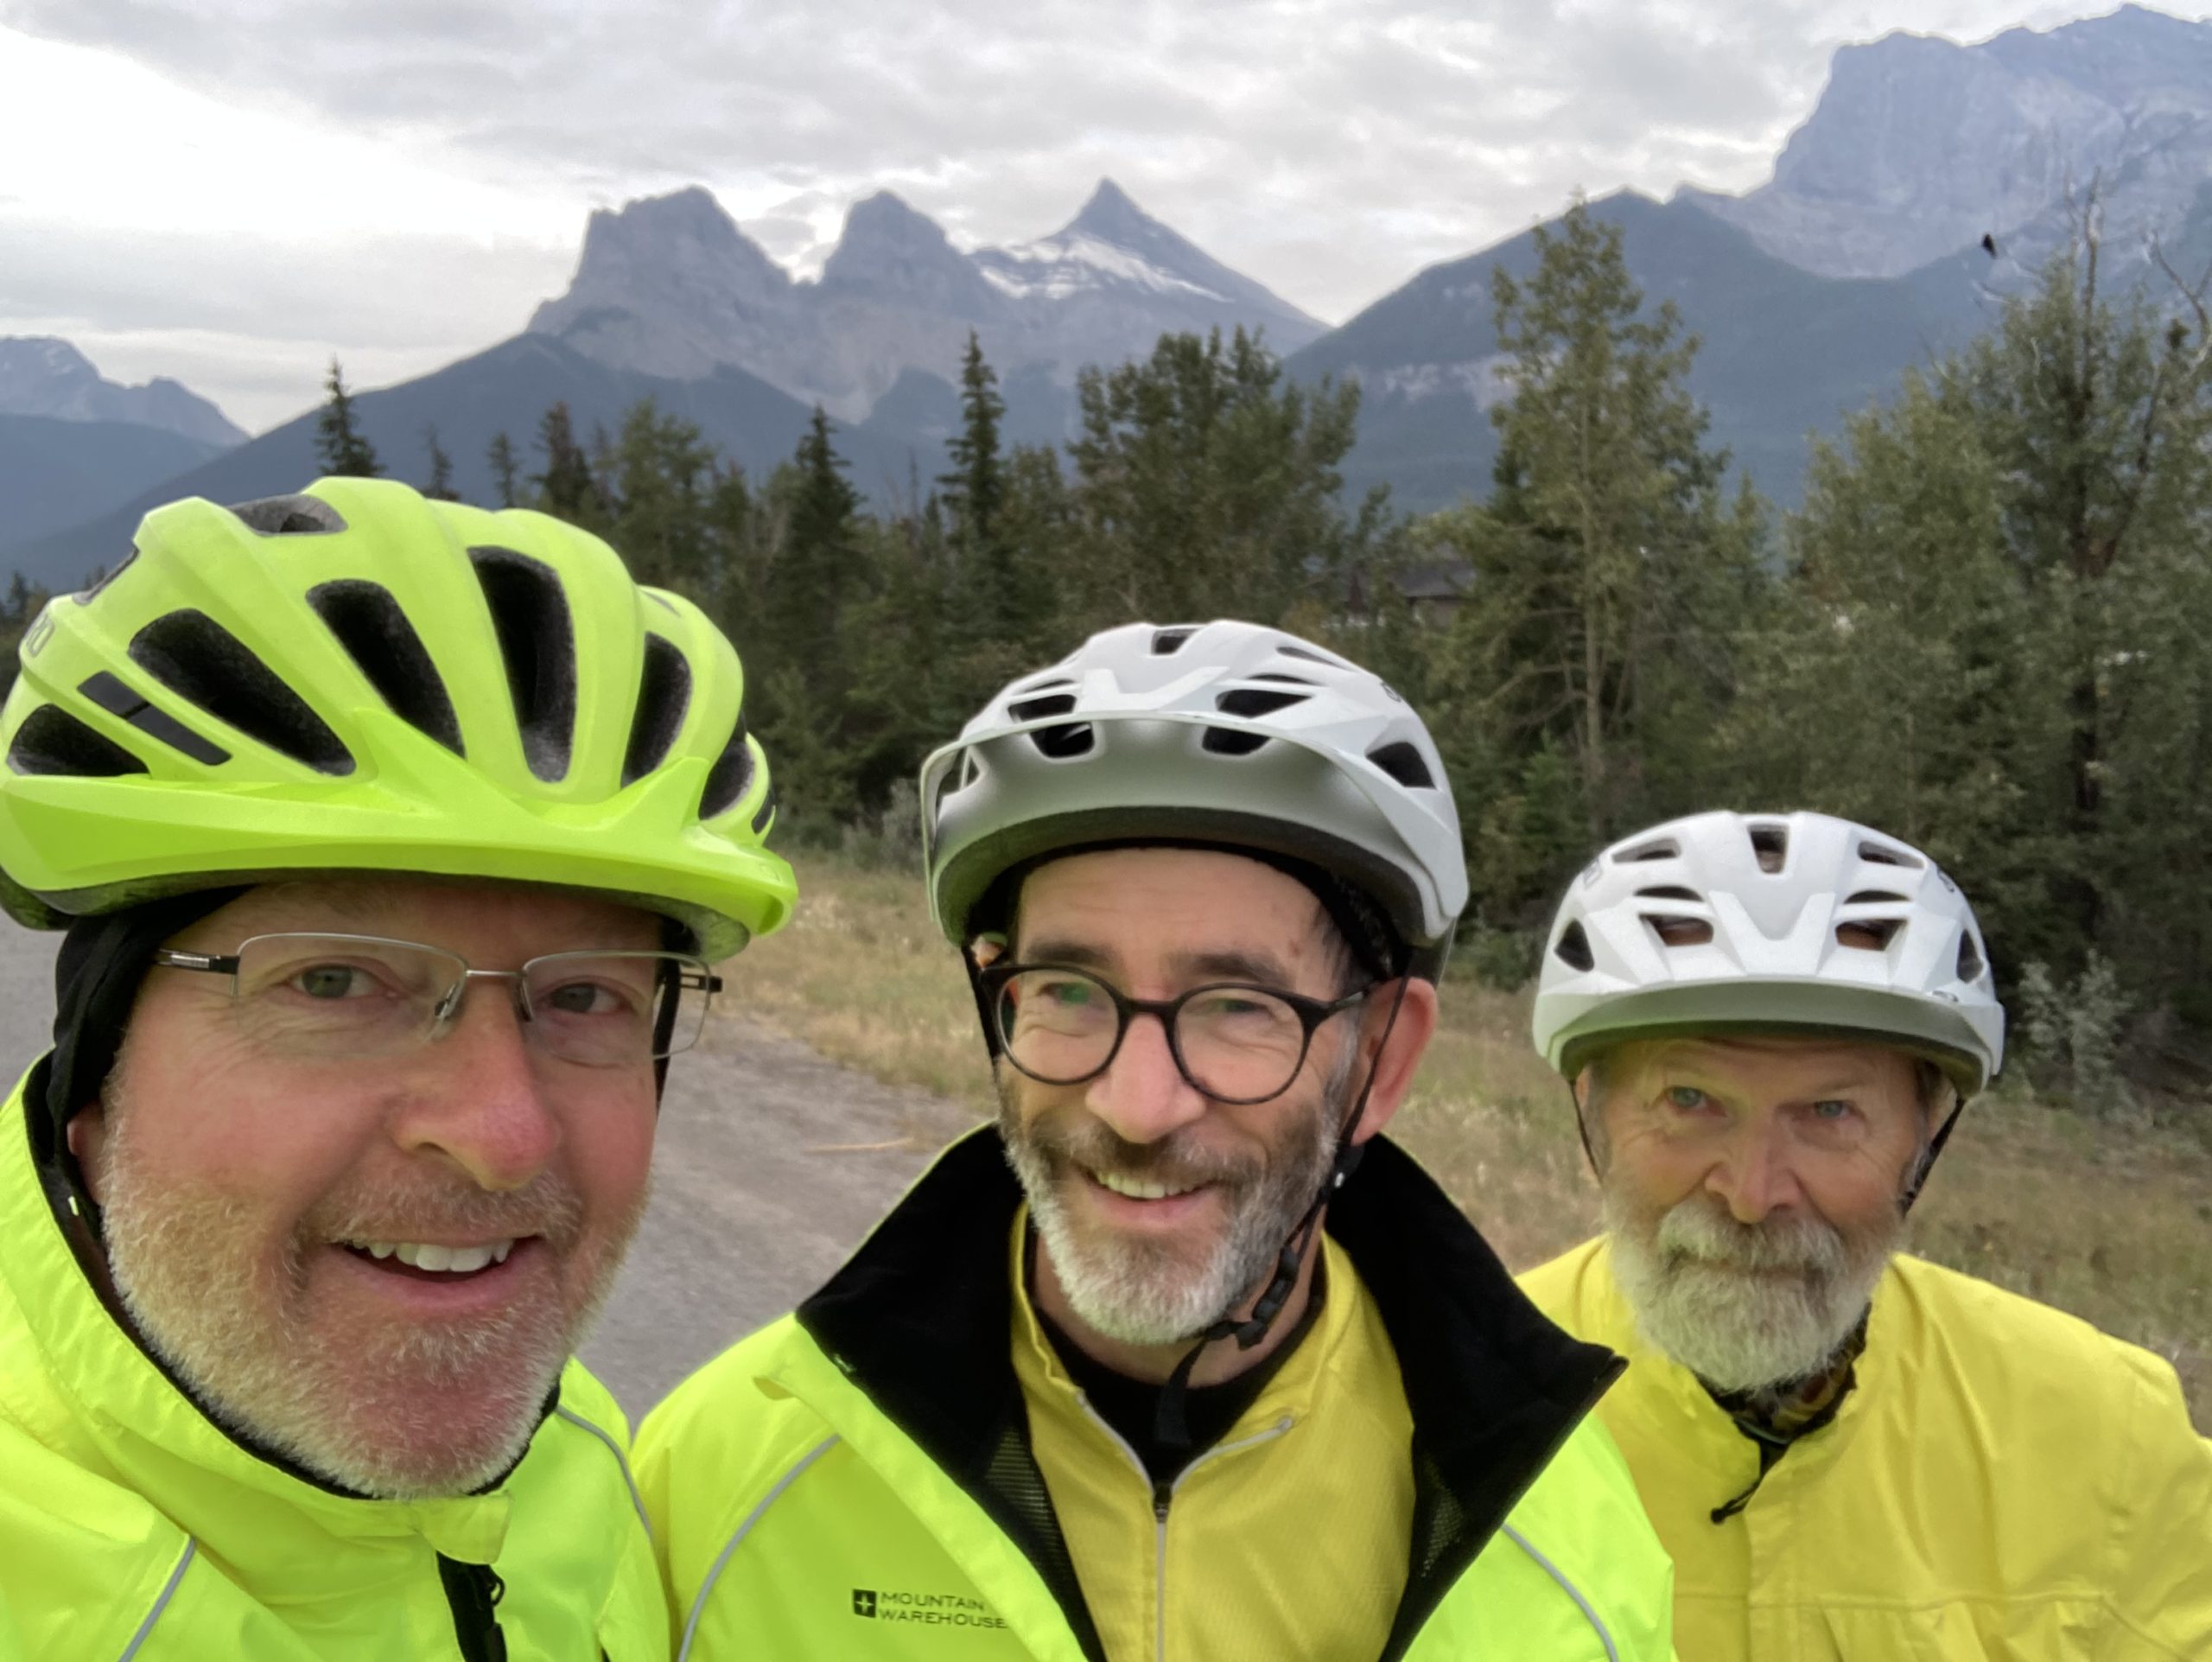 Day 25: Canmore to Strathmore – 151 KM